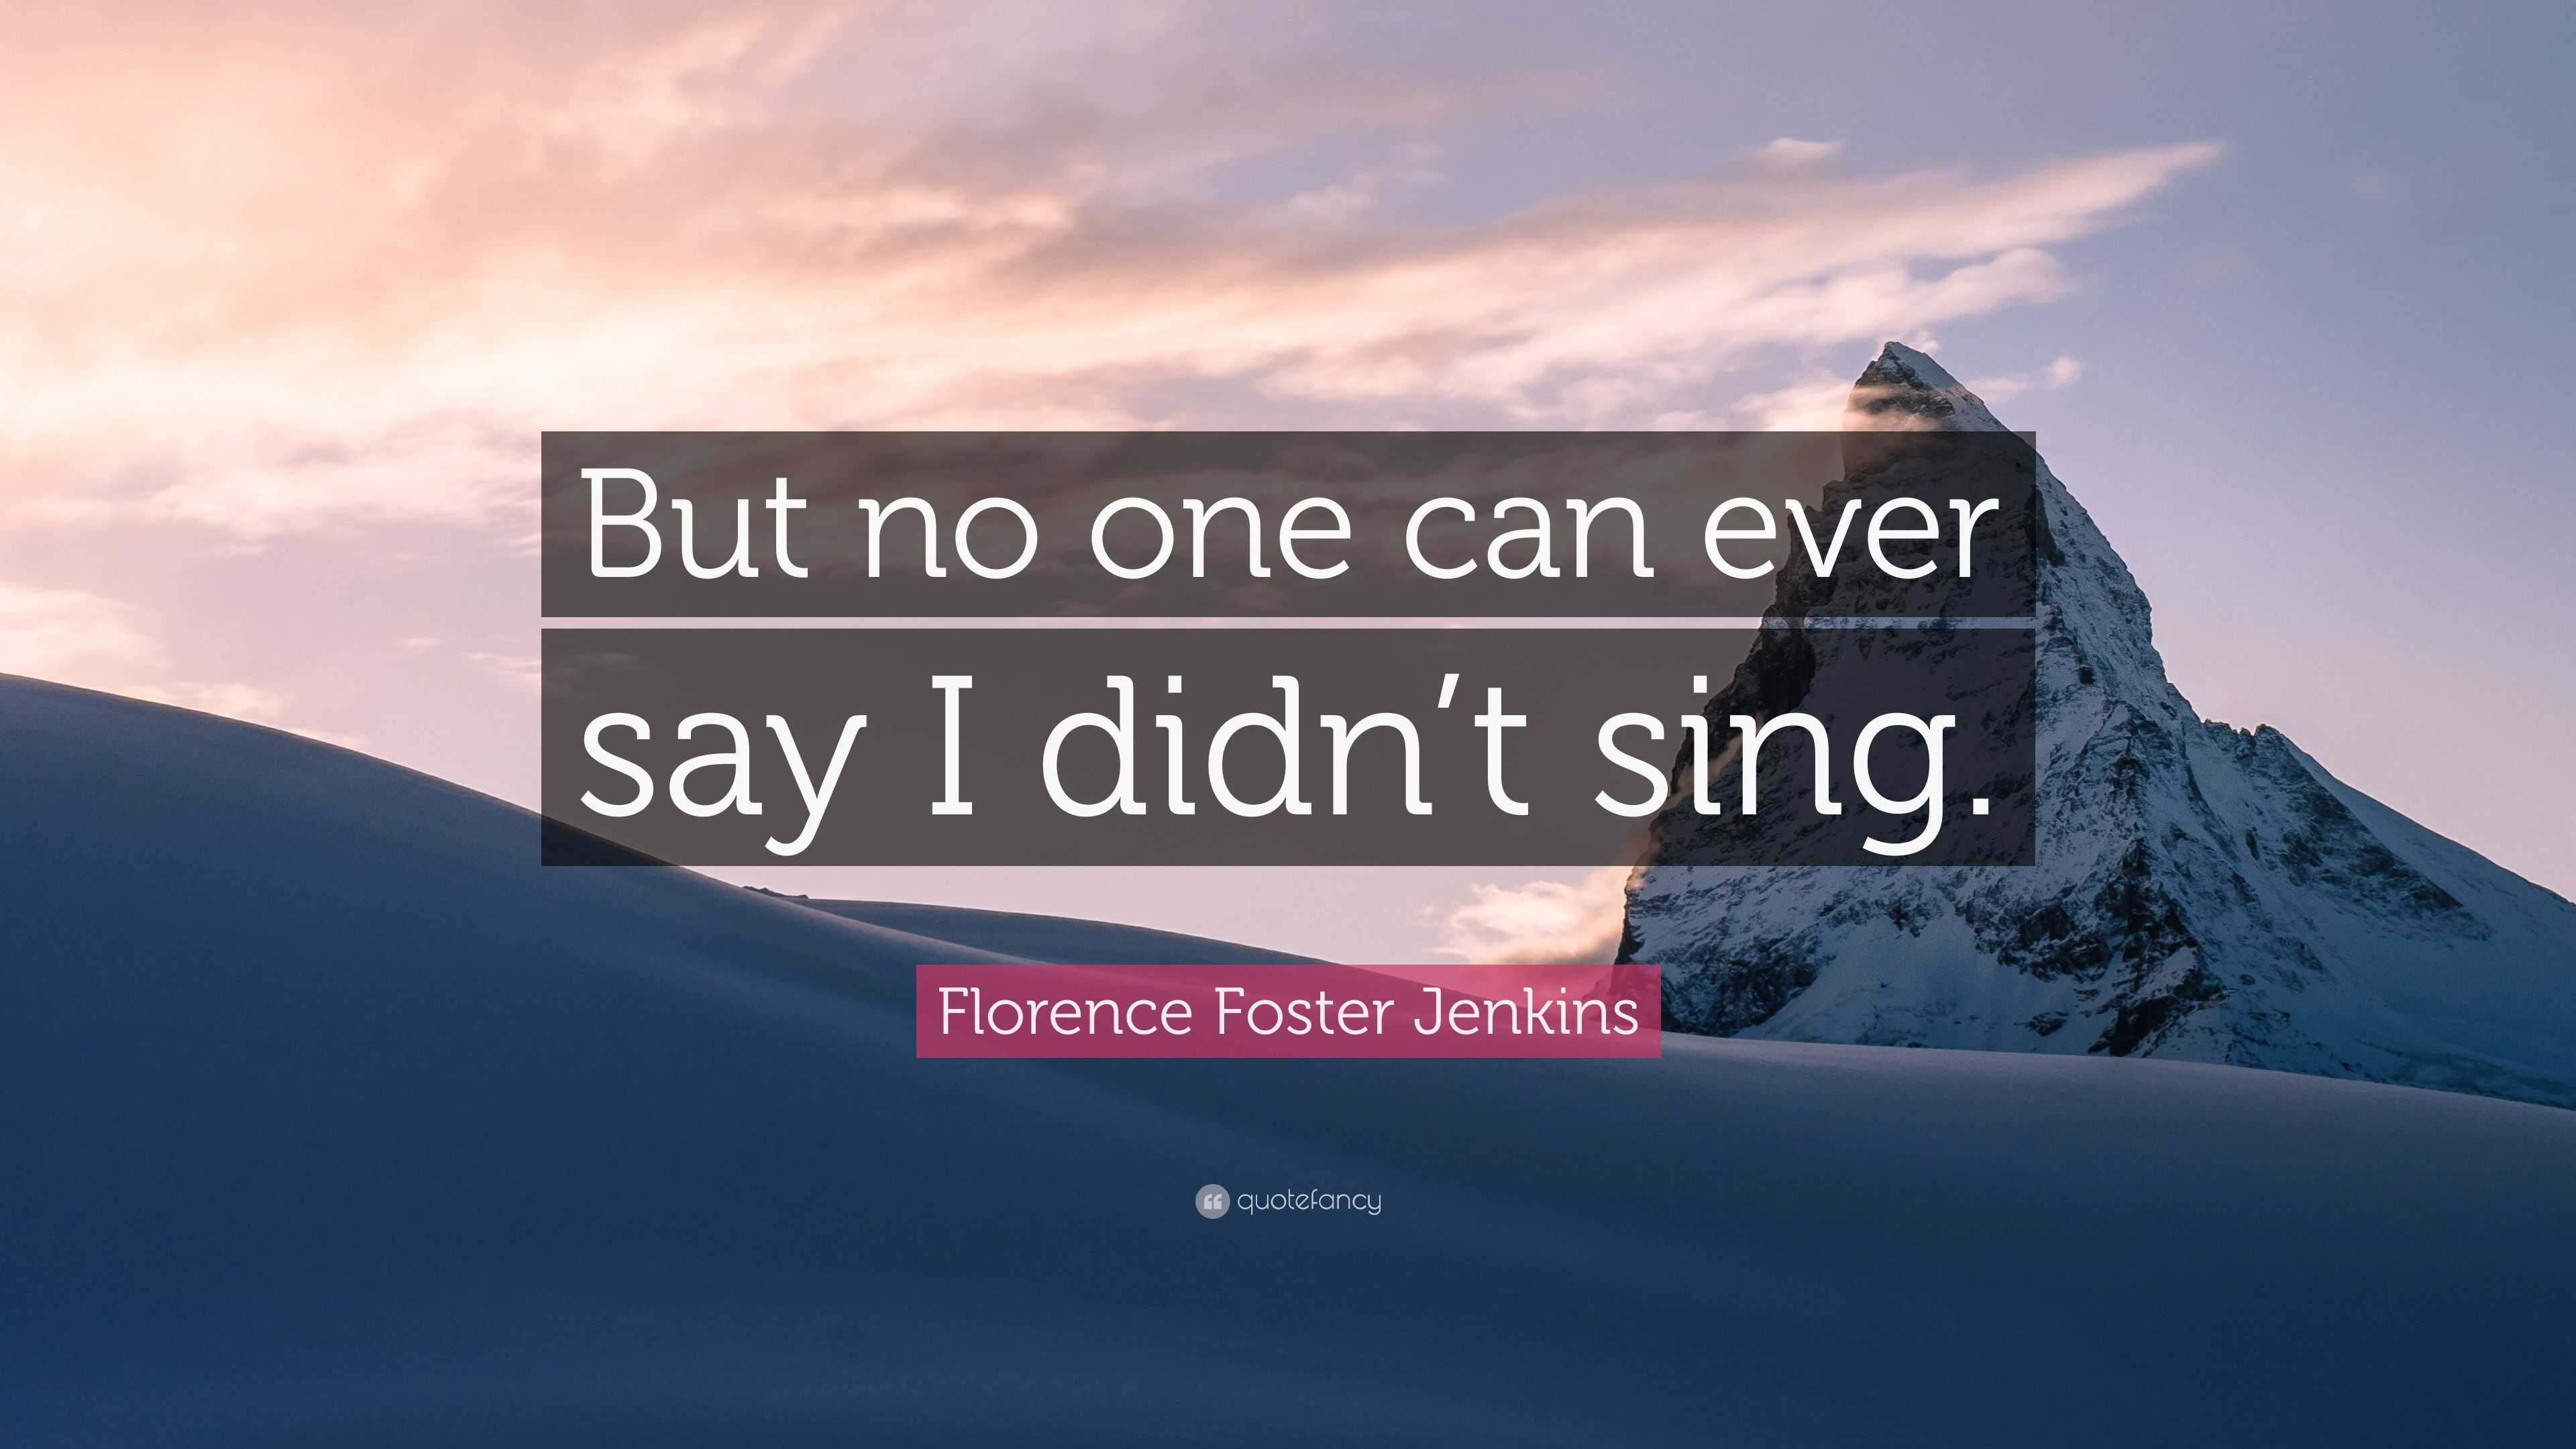 Florence Foster Jenkins Quote: “But no one can ever say I didn’t sing